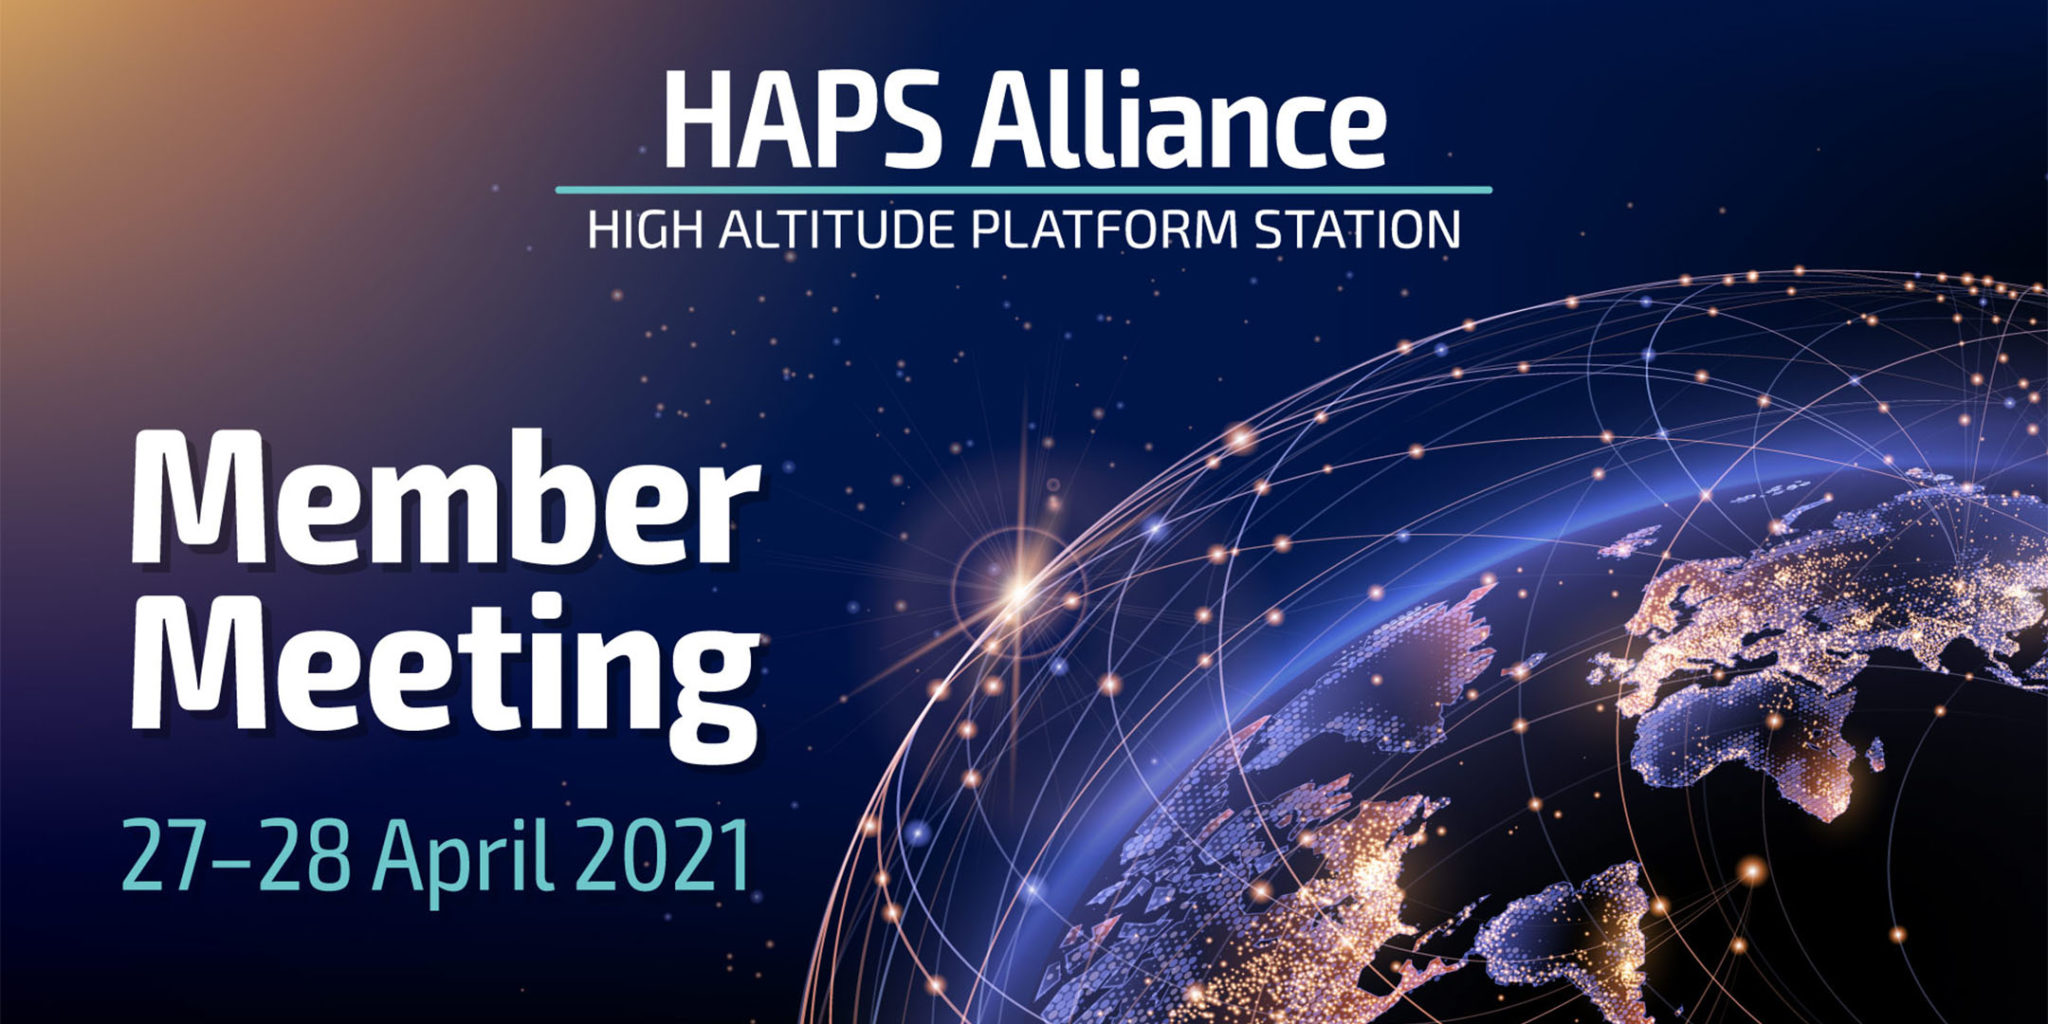 Inaugural Member Meeting Brings the HAPS Community Together HAPS Alliance